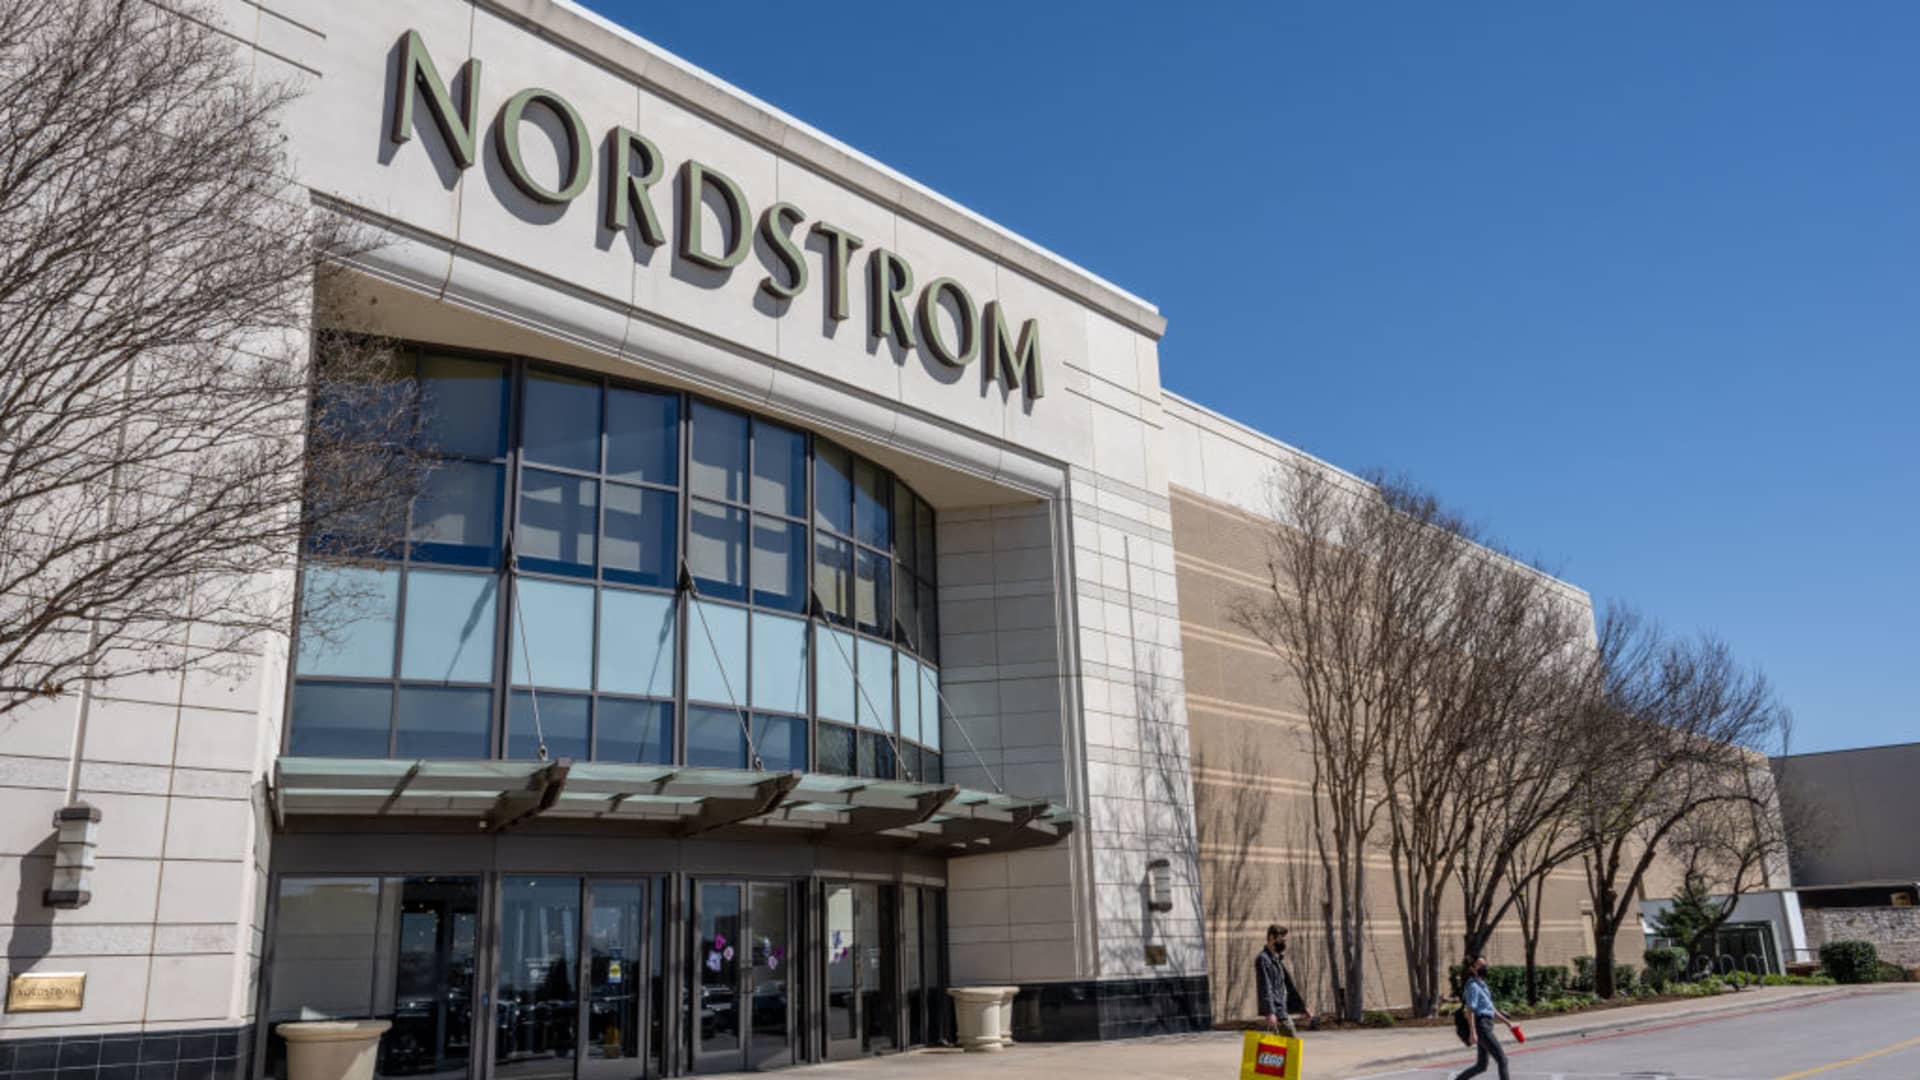 Shoppers in front of a Nordstrom department store in Austin, Texas, on March 3, 2023.